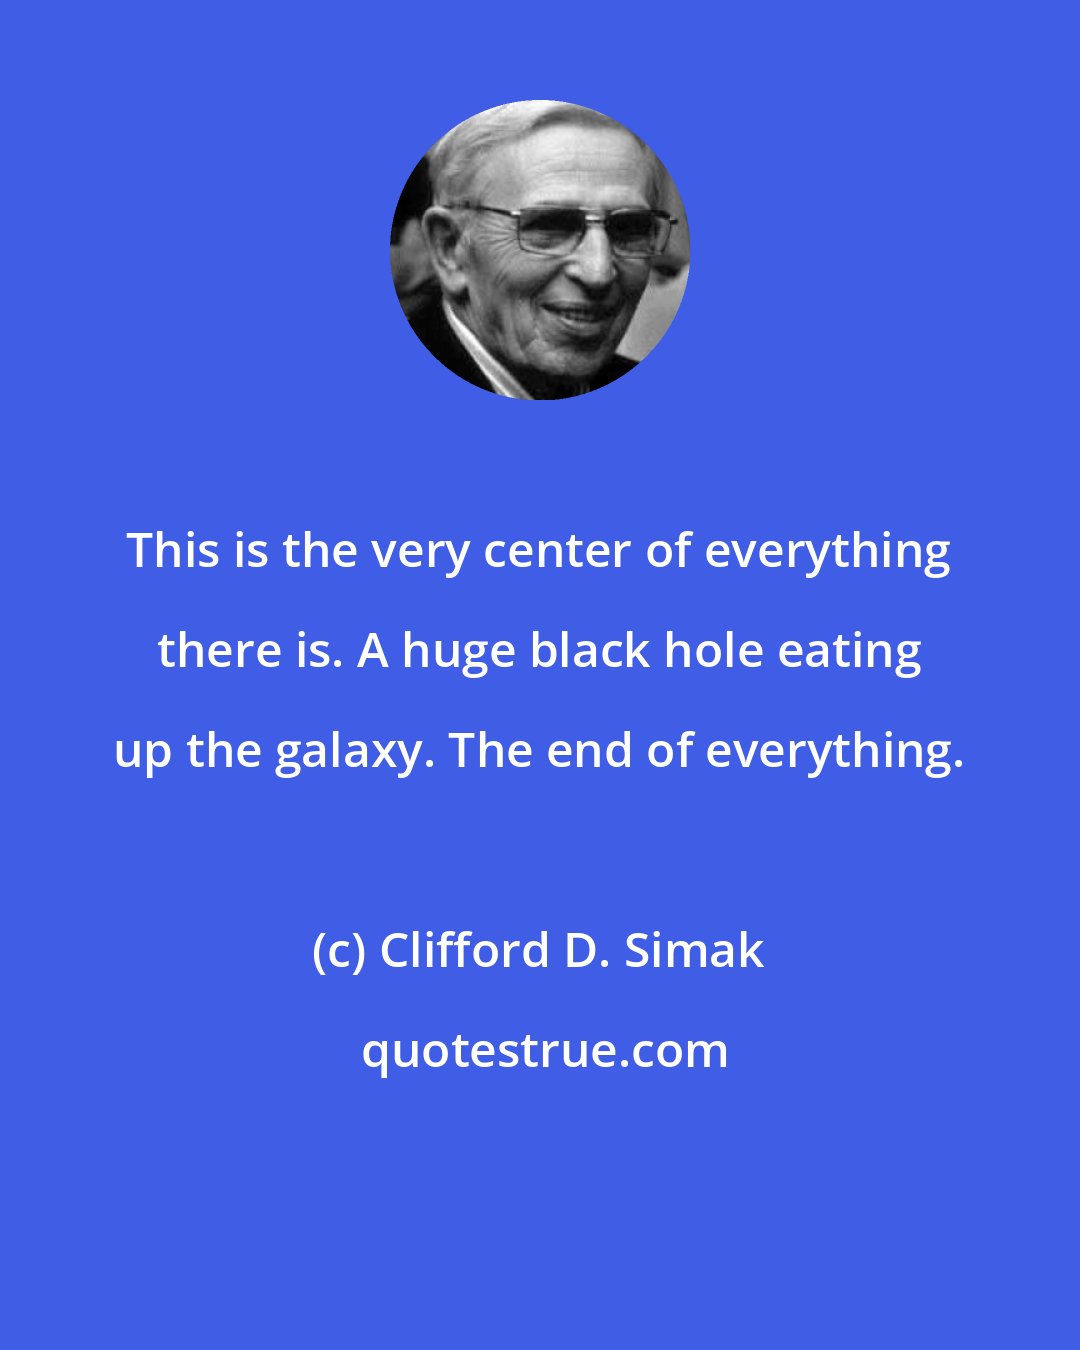 Clifford D. Simak: This is the very center of everything there is. A huge black hole eating up the galaxy. The end of everything.